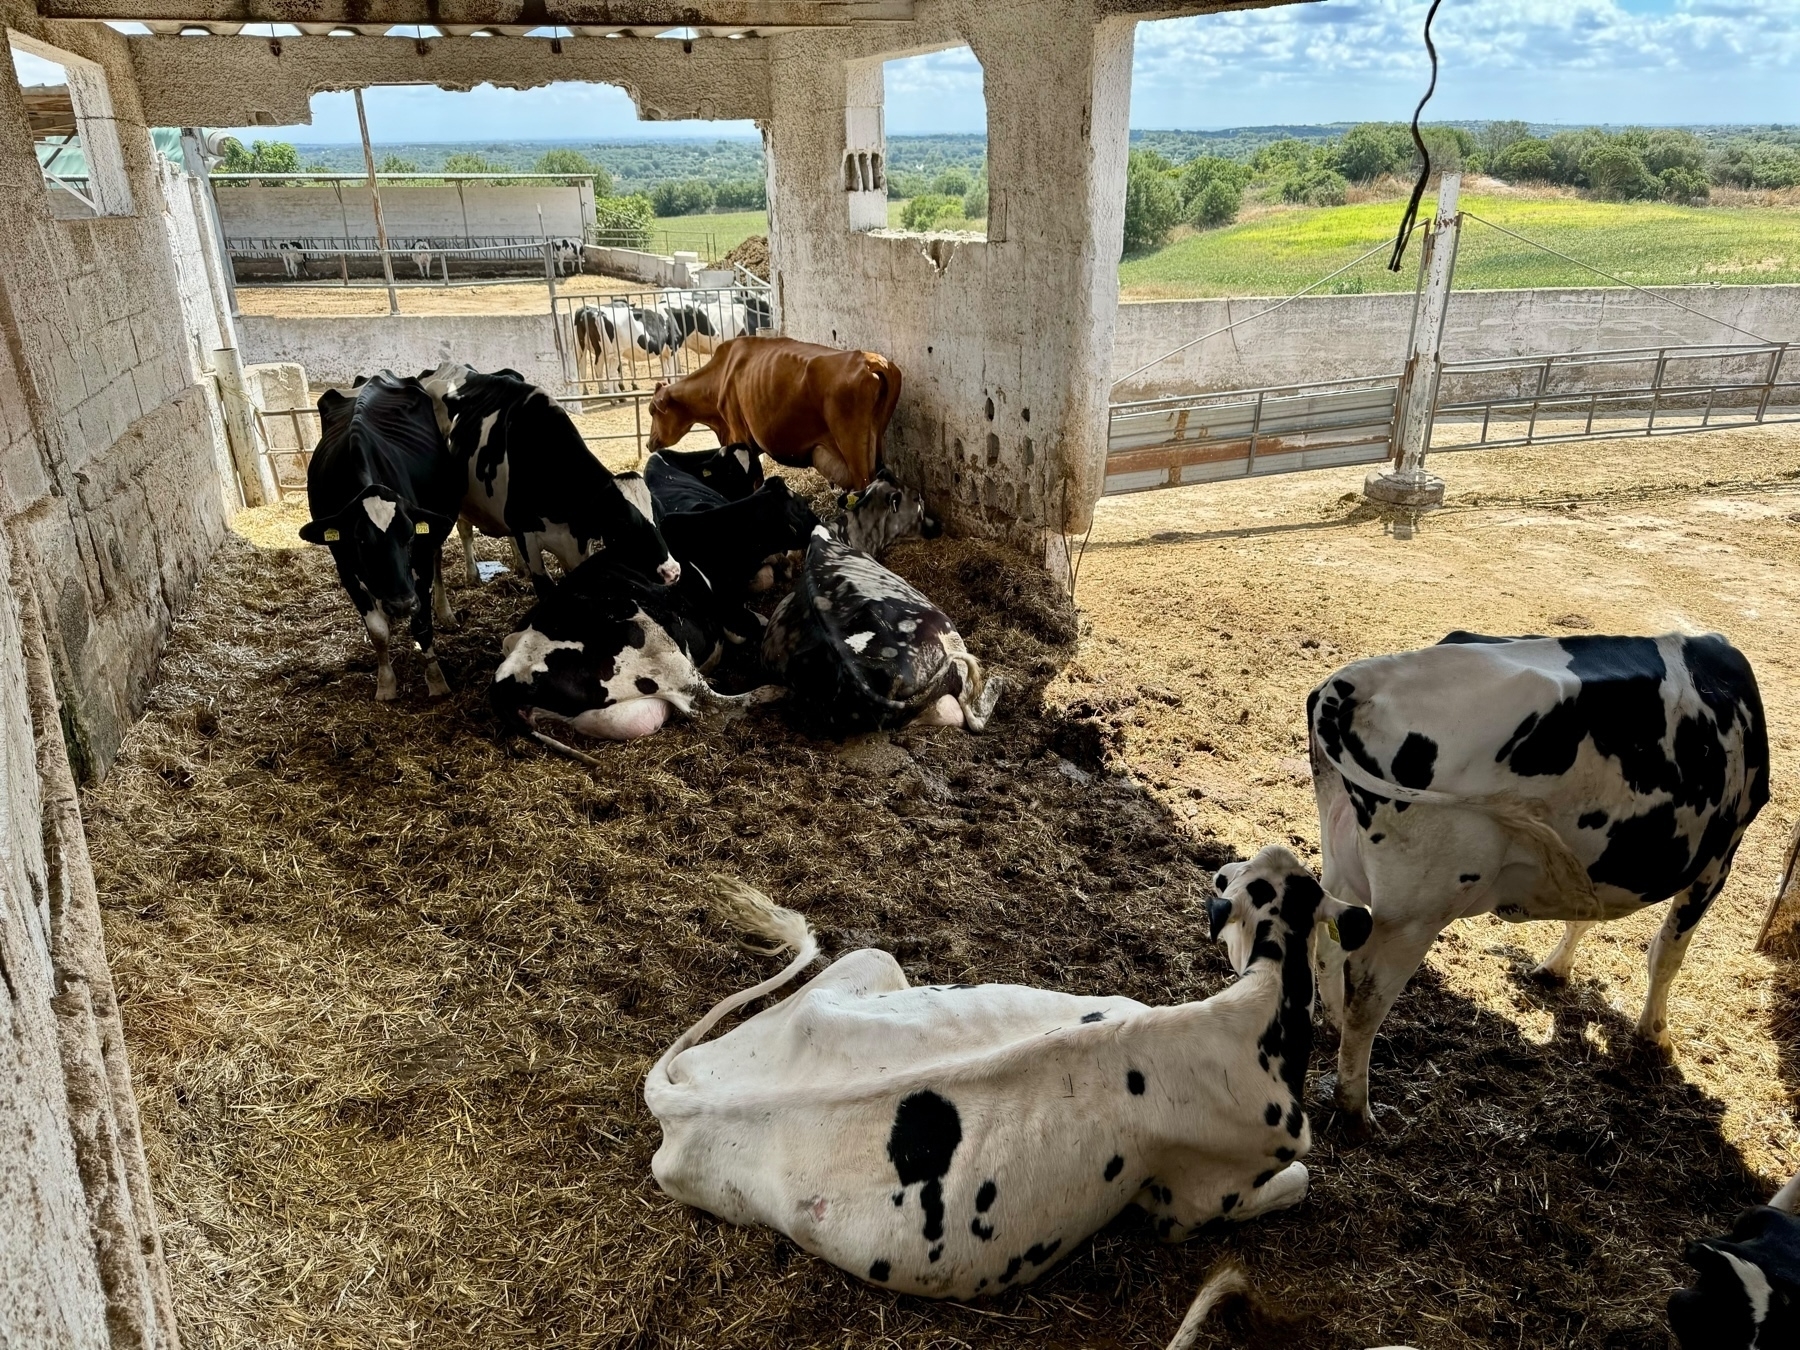 A group of cows resting inside a partially open shed, with a mix of black-and-white and brown cows. Hay is scattered on the ground, and there is an open view of fields and trees in the background.